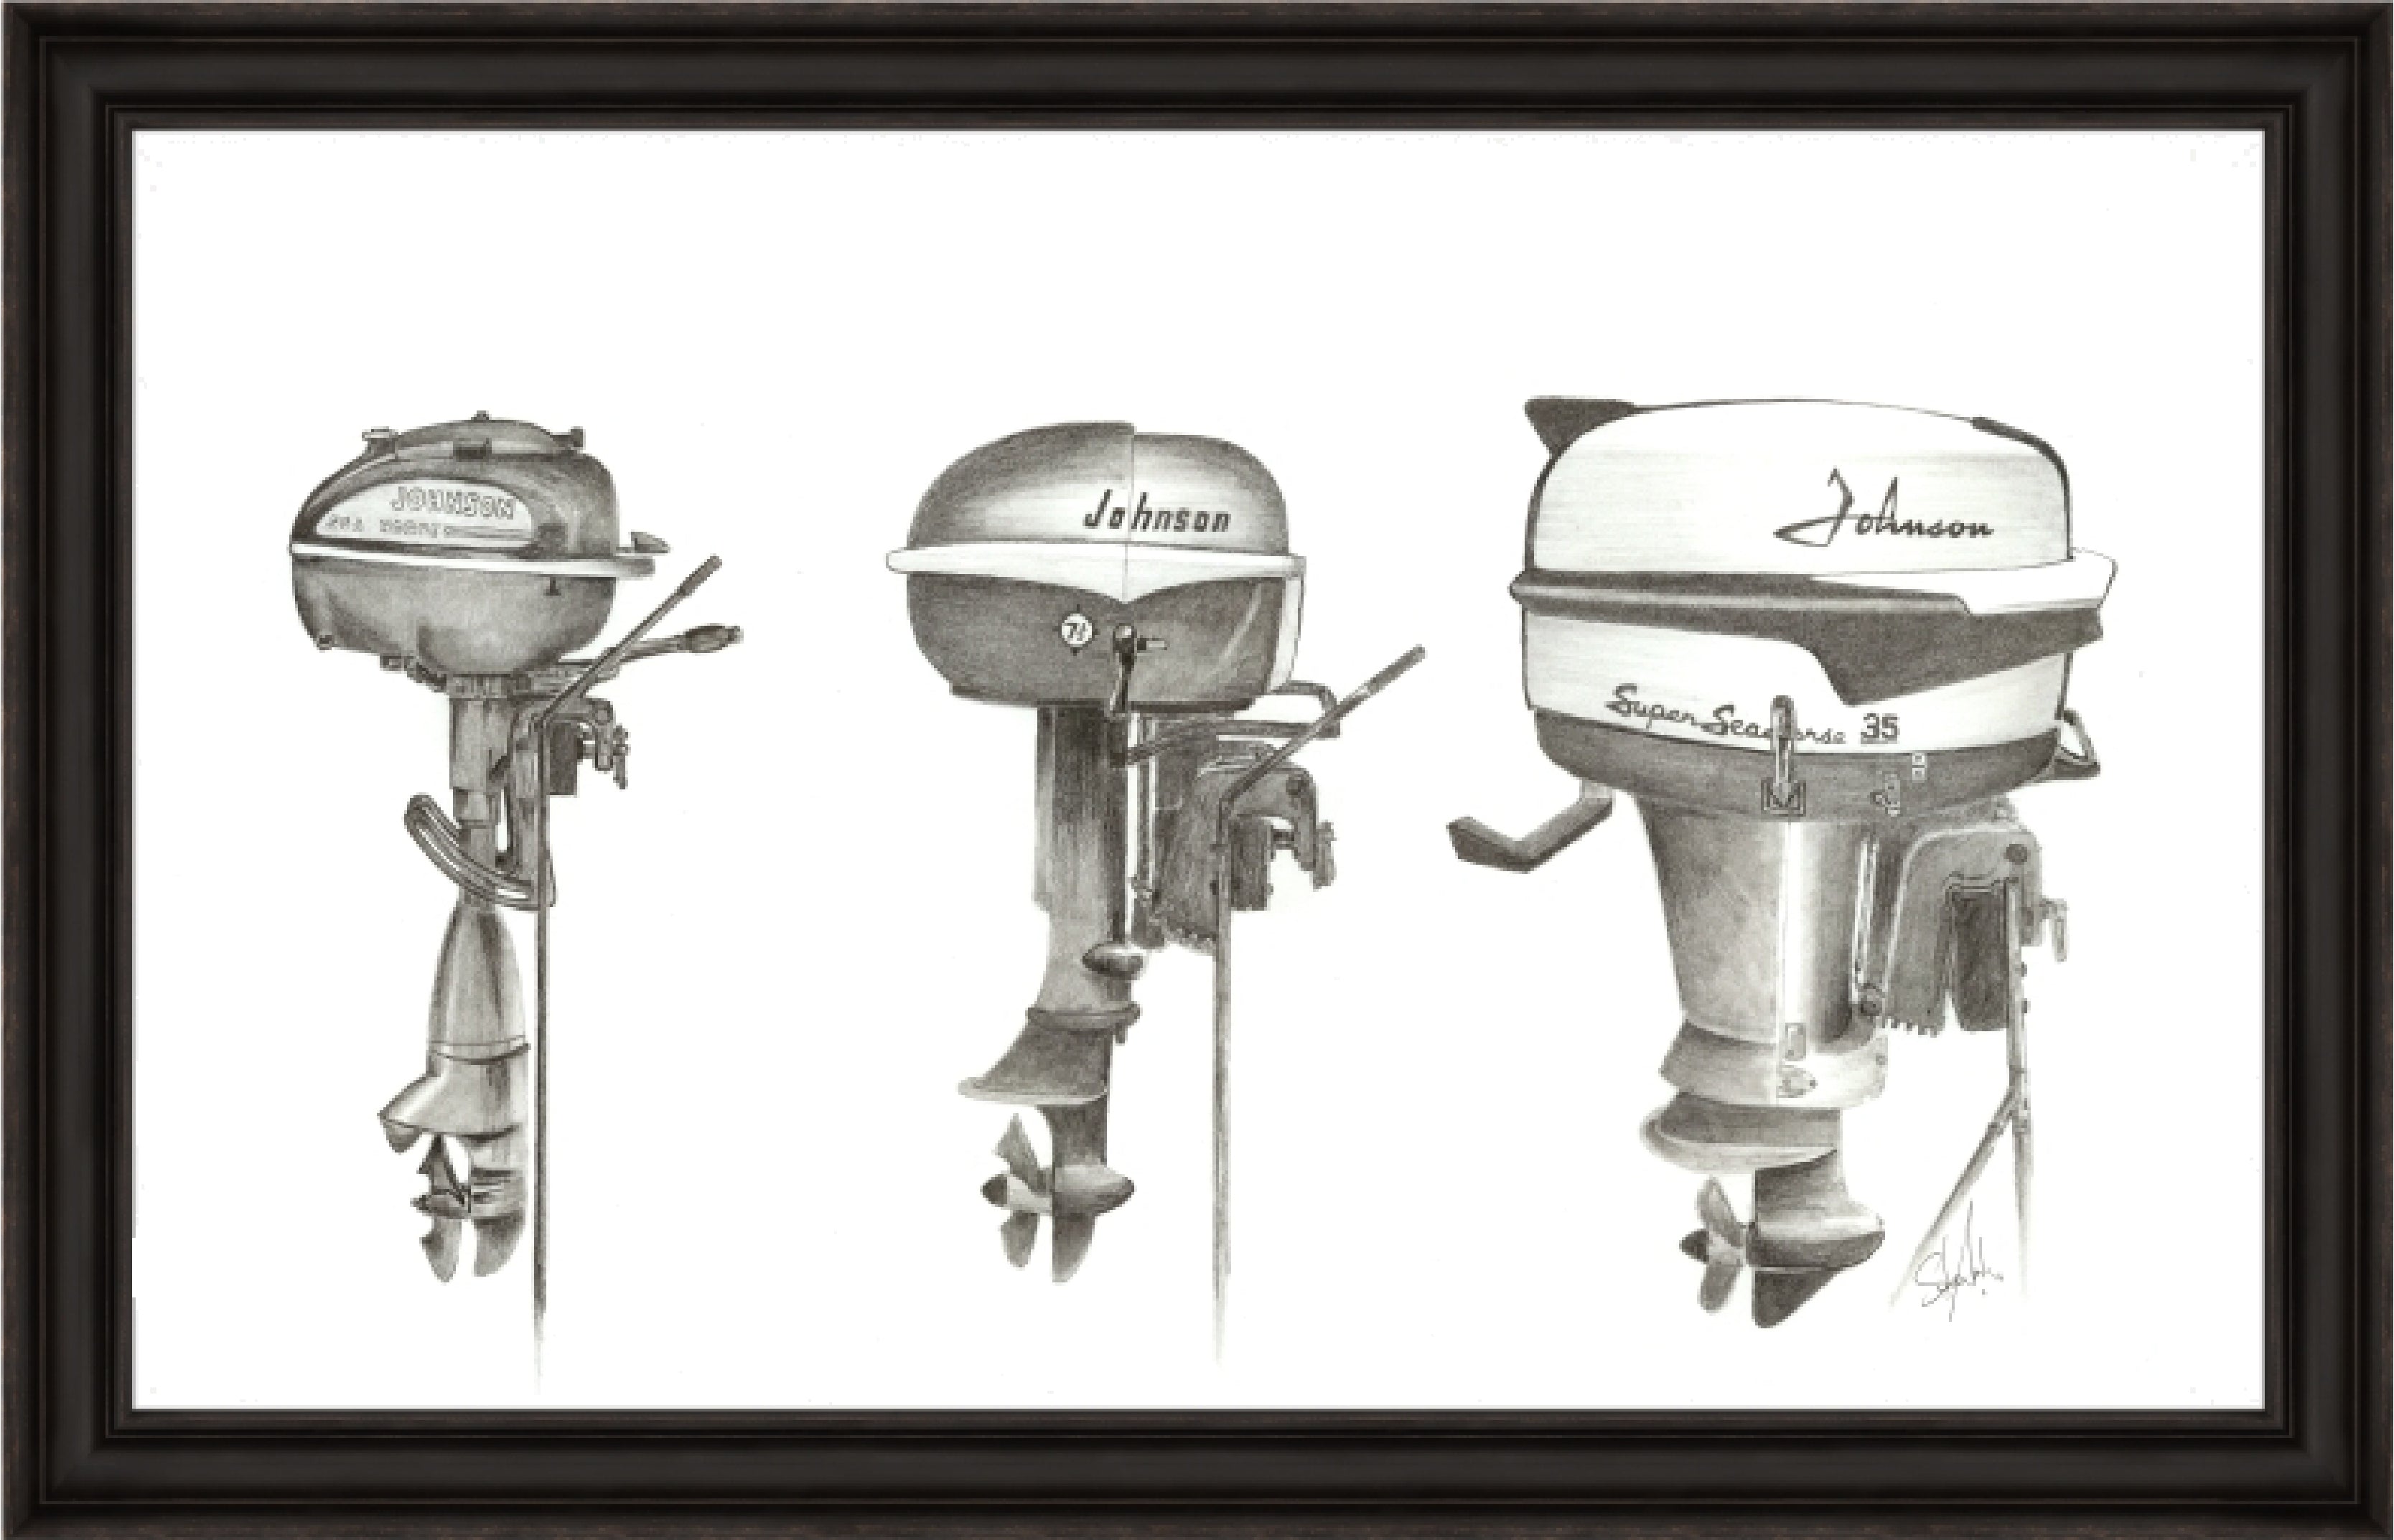 Johnsons - Antique Outboards